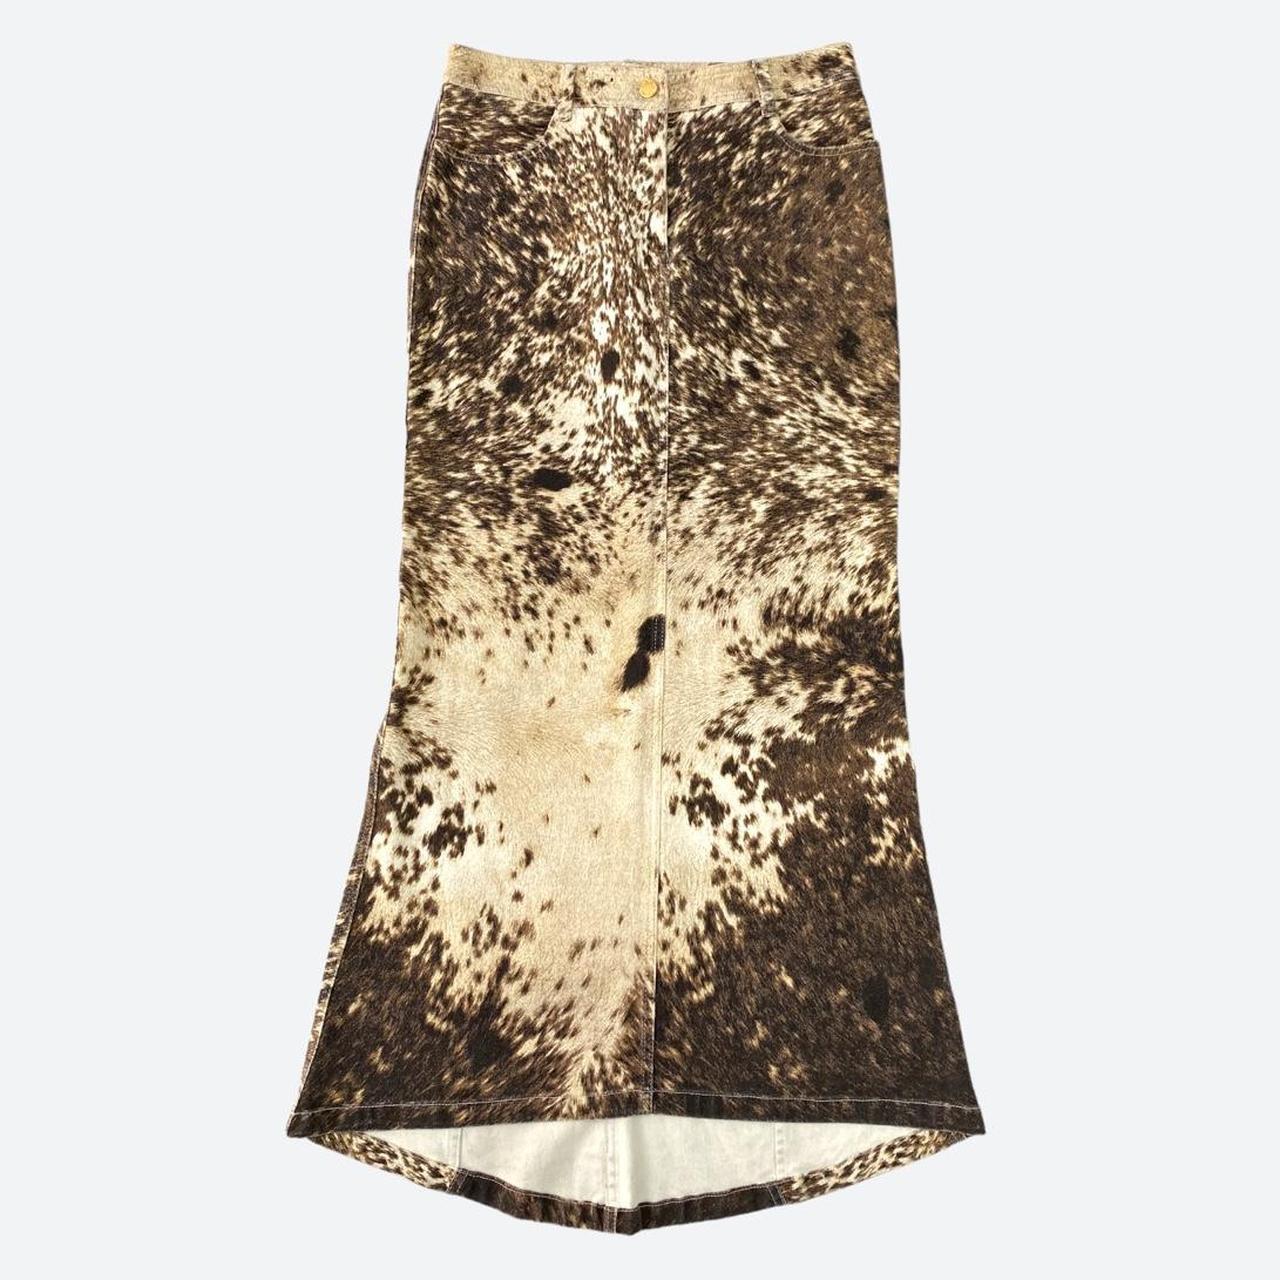 This rare cotton maxi skirt is an instantly recognizable late 90s Roberto Cavalli
design as it displays the iconic 1999 horse print, one that defined what would
become some of the most recognizable trends from the turn of the century. The
skirt is